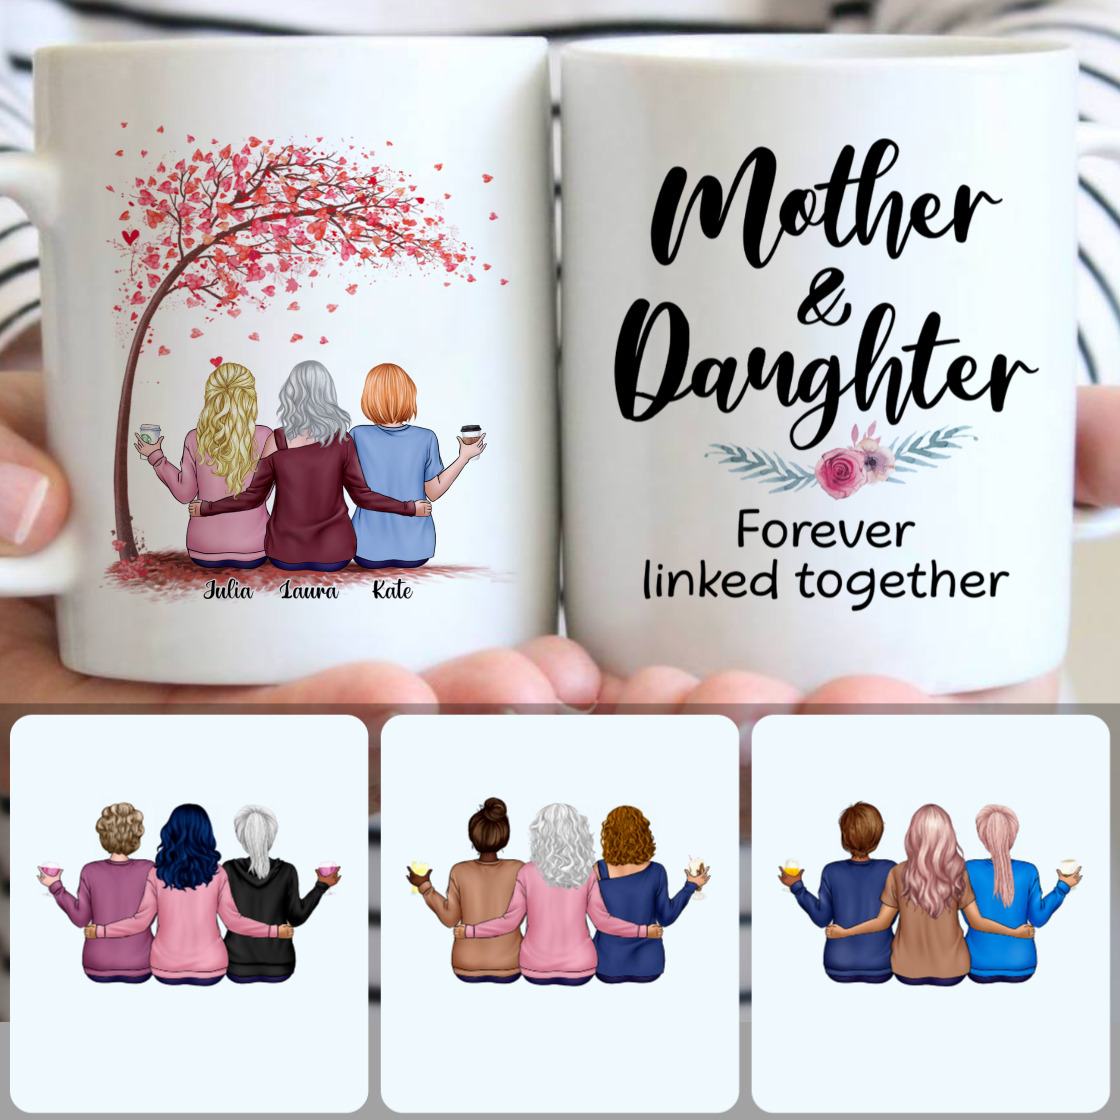 Personalized Mug, Memorial Gifts For Stepmom, Mother & 2 Daughters Customized Coffee Mug With Names